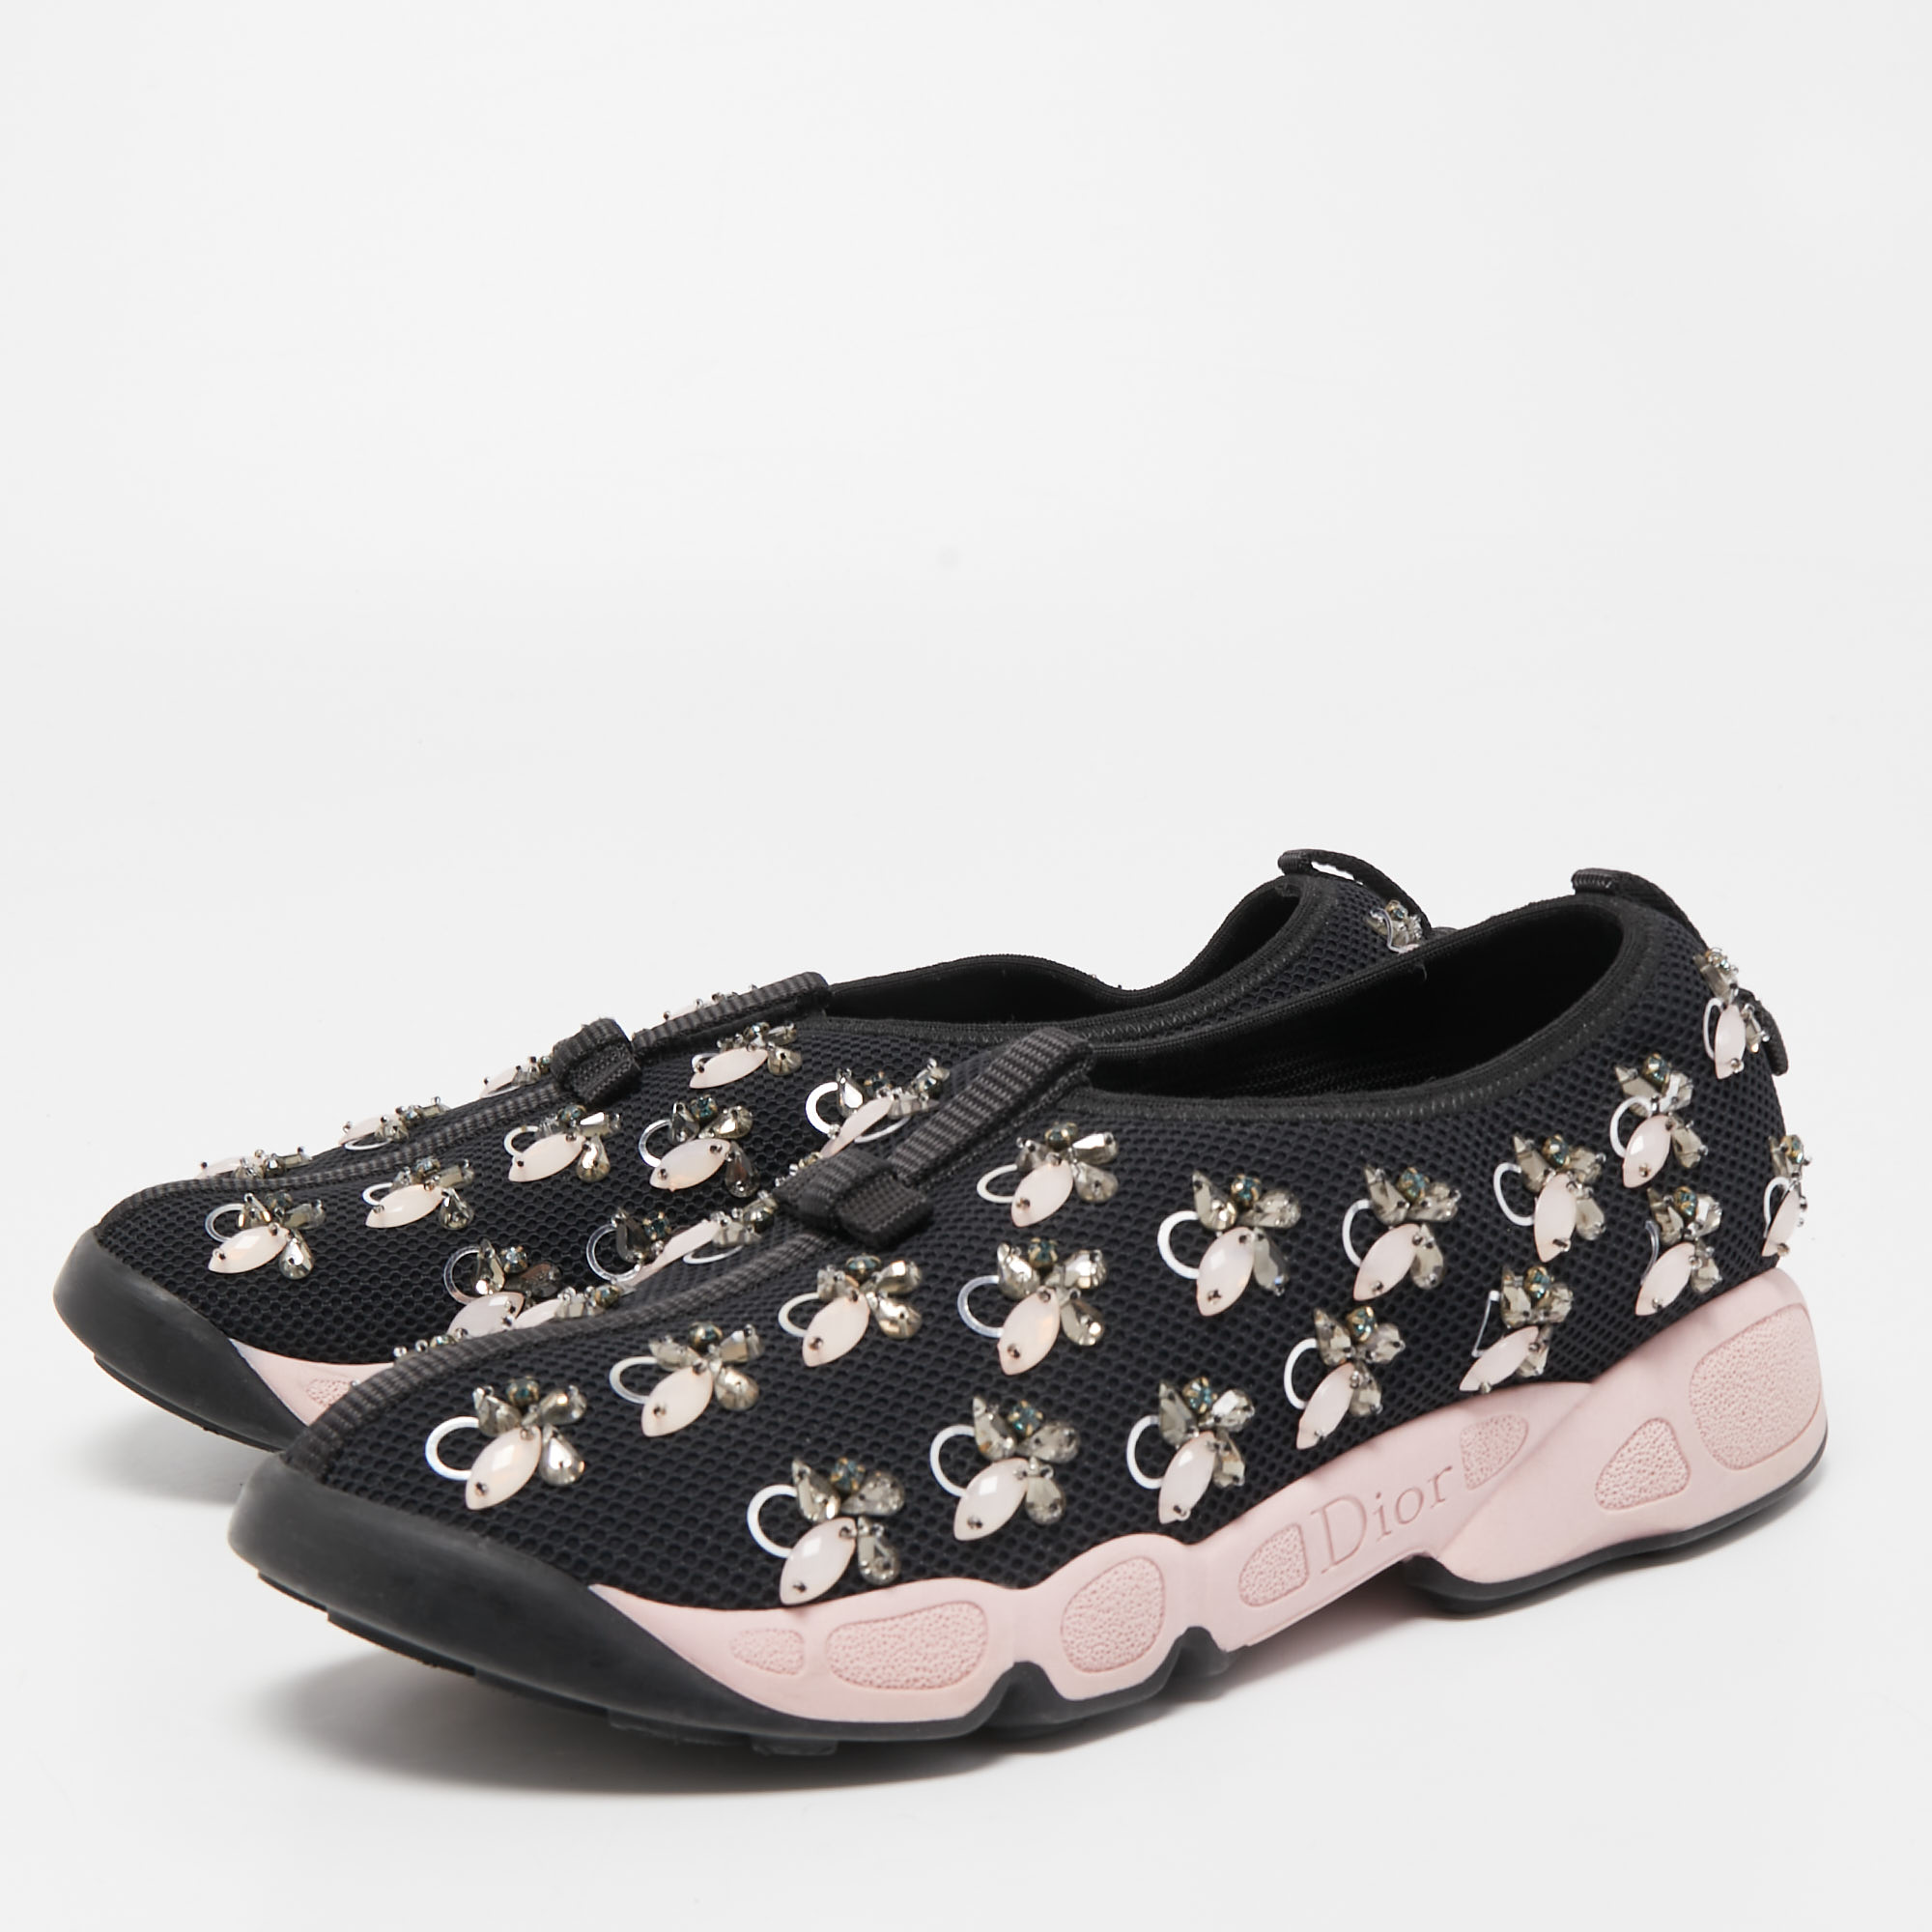 

Dior Black/Pink Embellished Mesh Fusion Sneakers Size